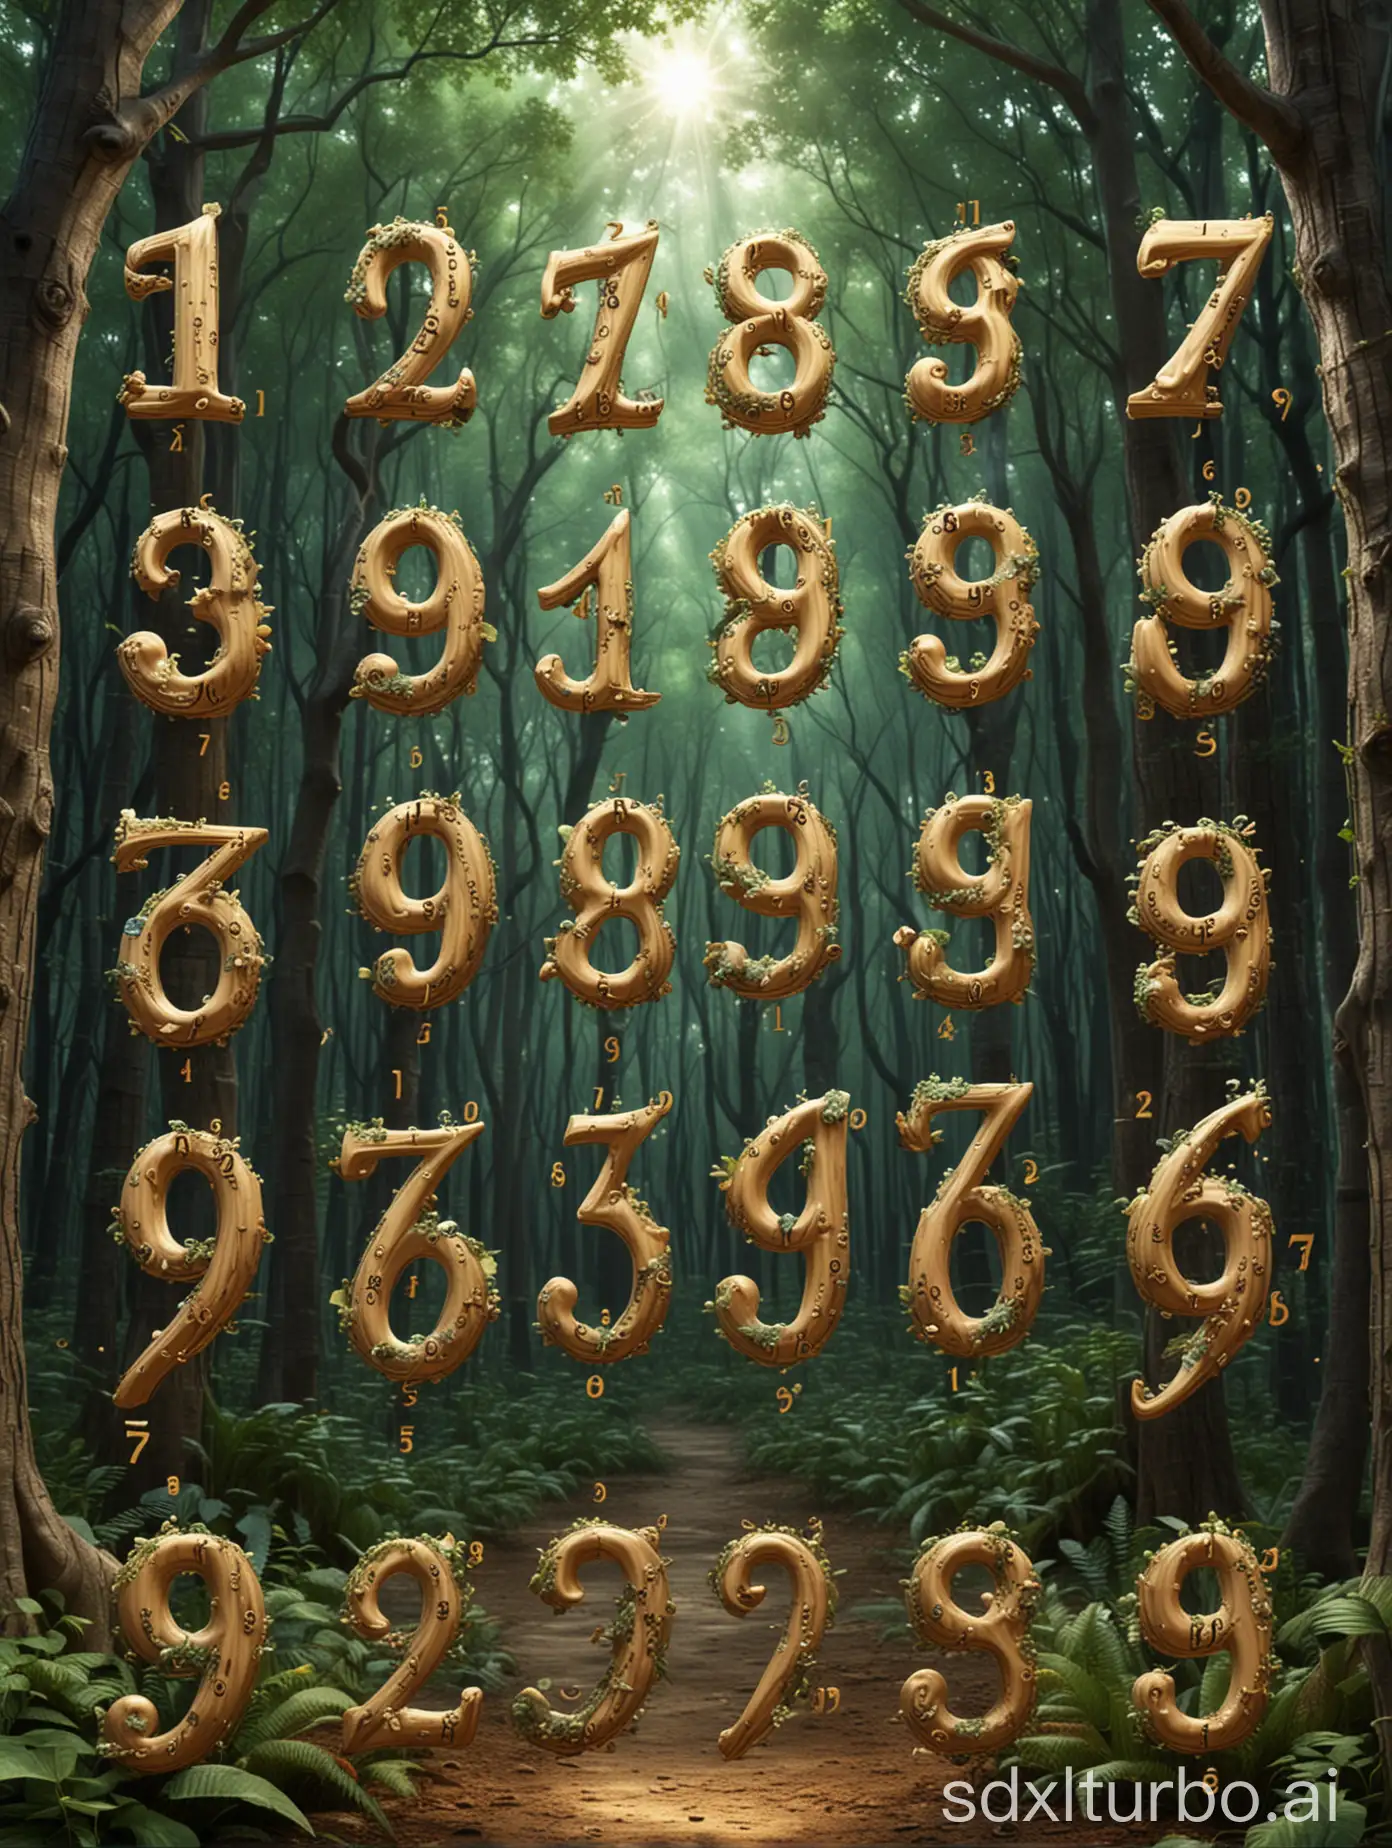 The Arabic numerals 1, 2, 3, 4, 5, 6, 7, 8, 9 flash in the magical forest.